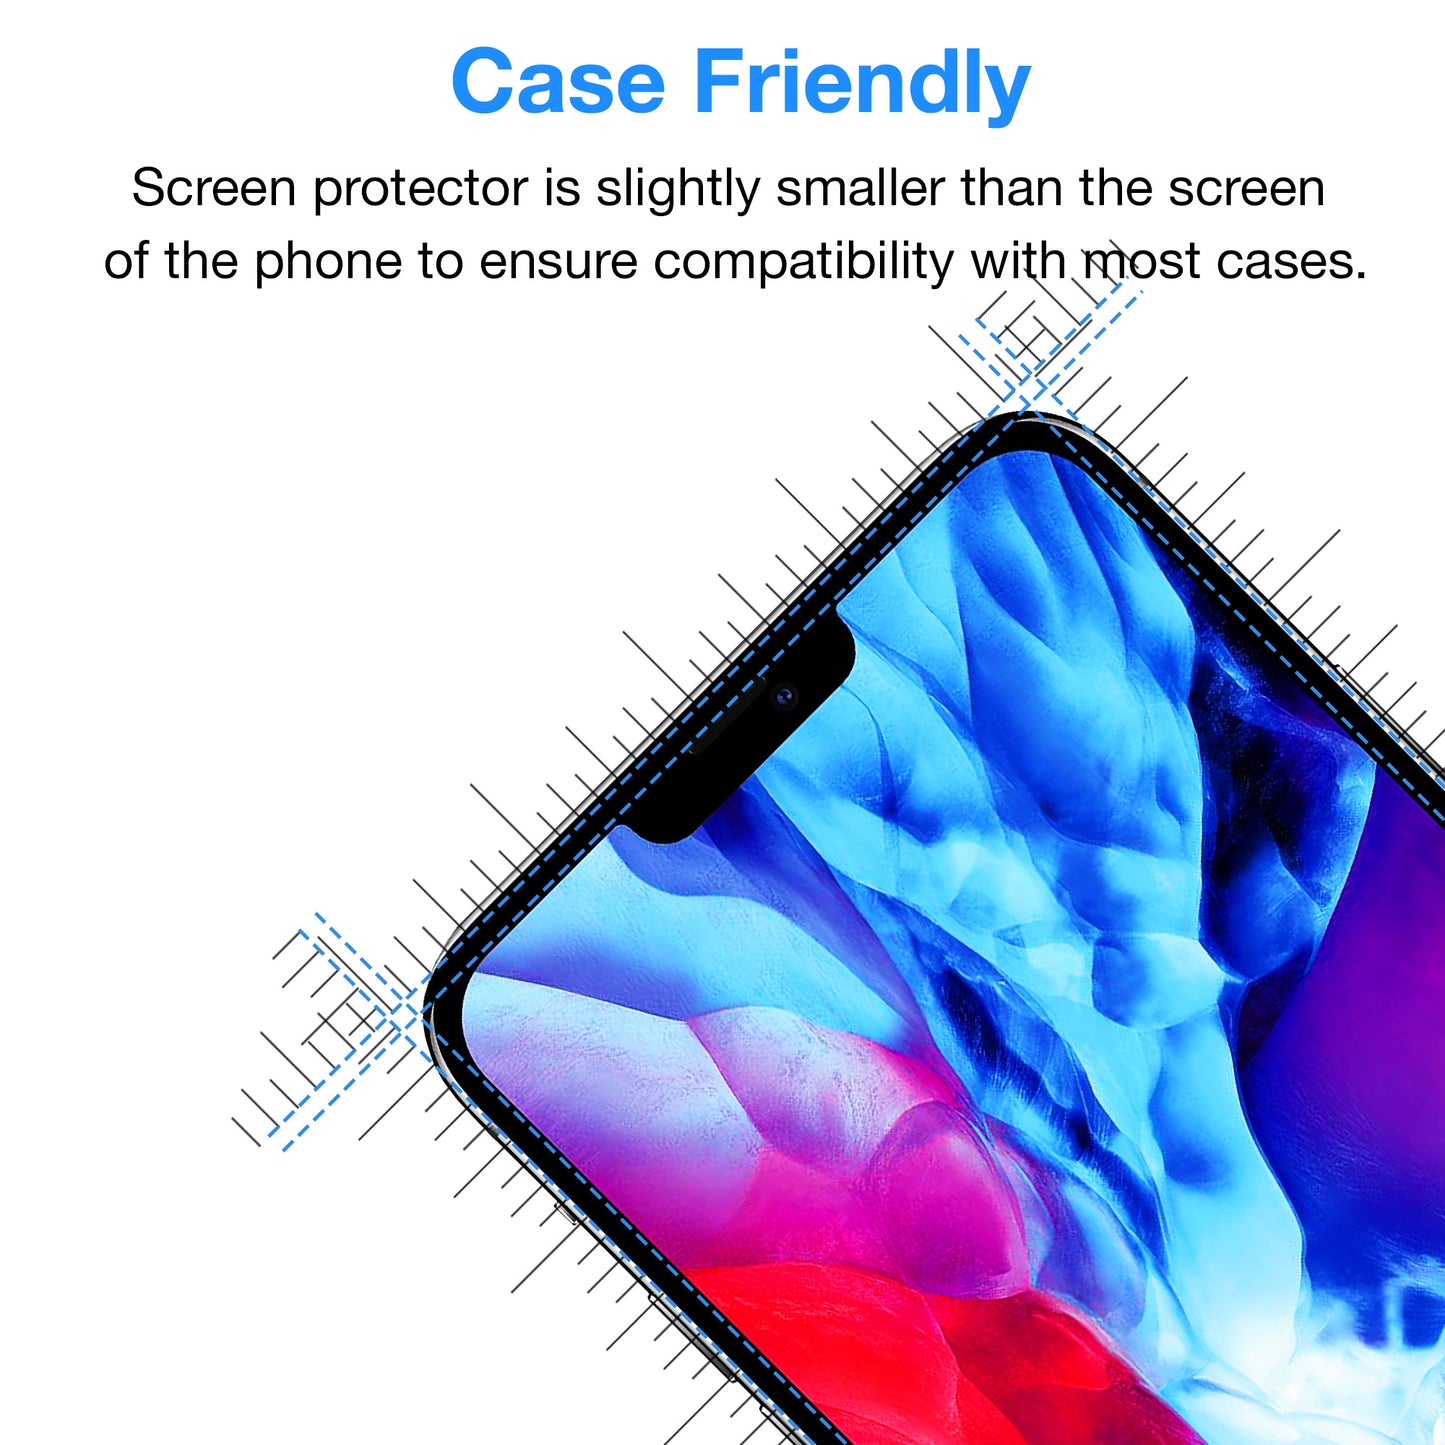 [3 Pack] MEZON Apple iPhone 12 (6.1") Ultra Clear Screen Protector Case Friendly Film (iPhone 12, Clear)